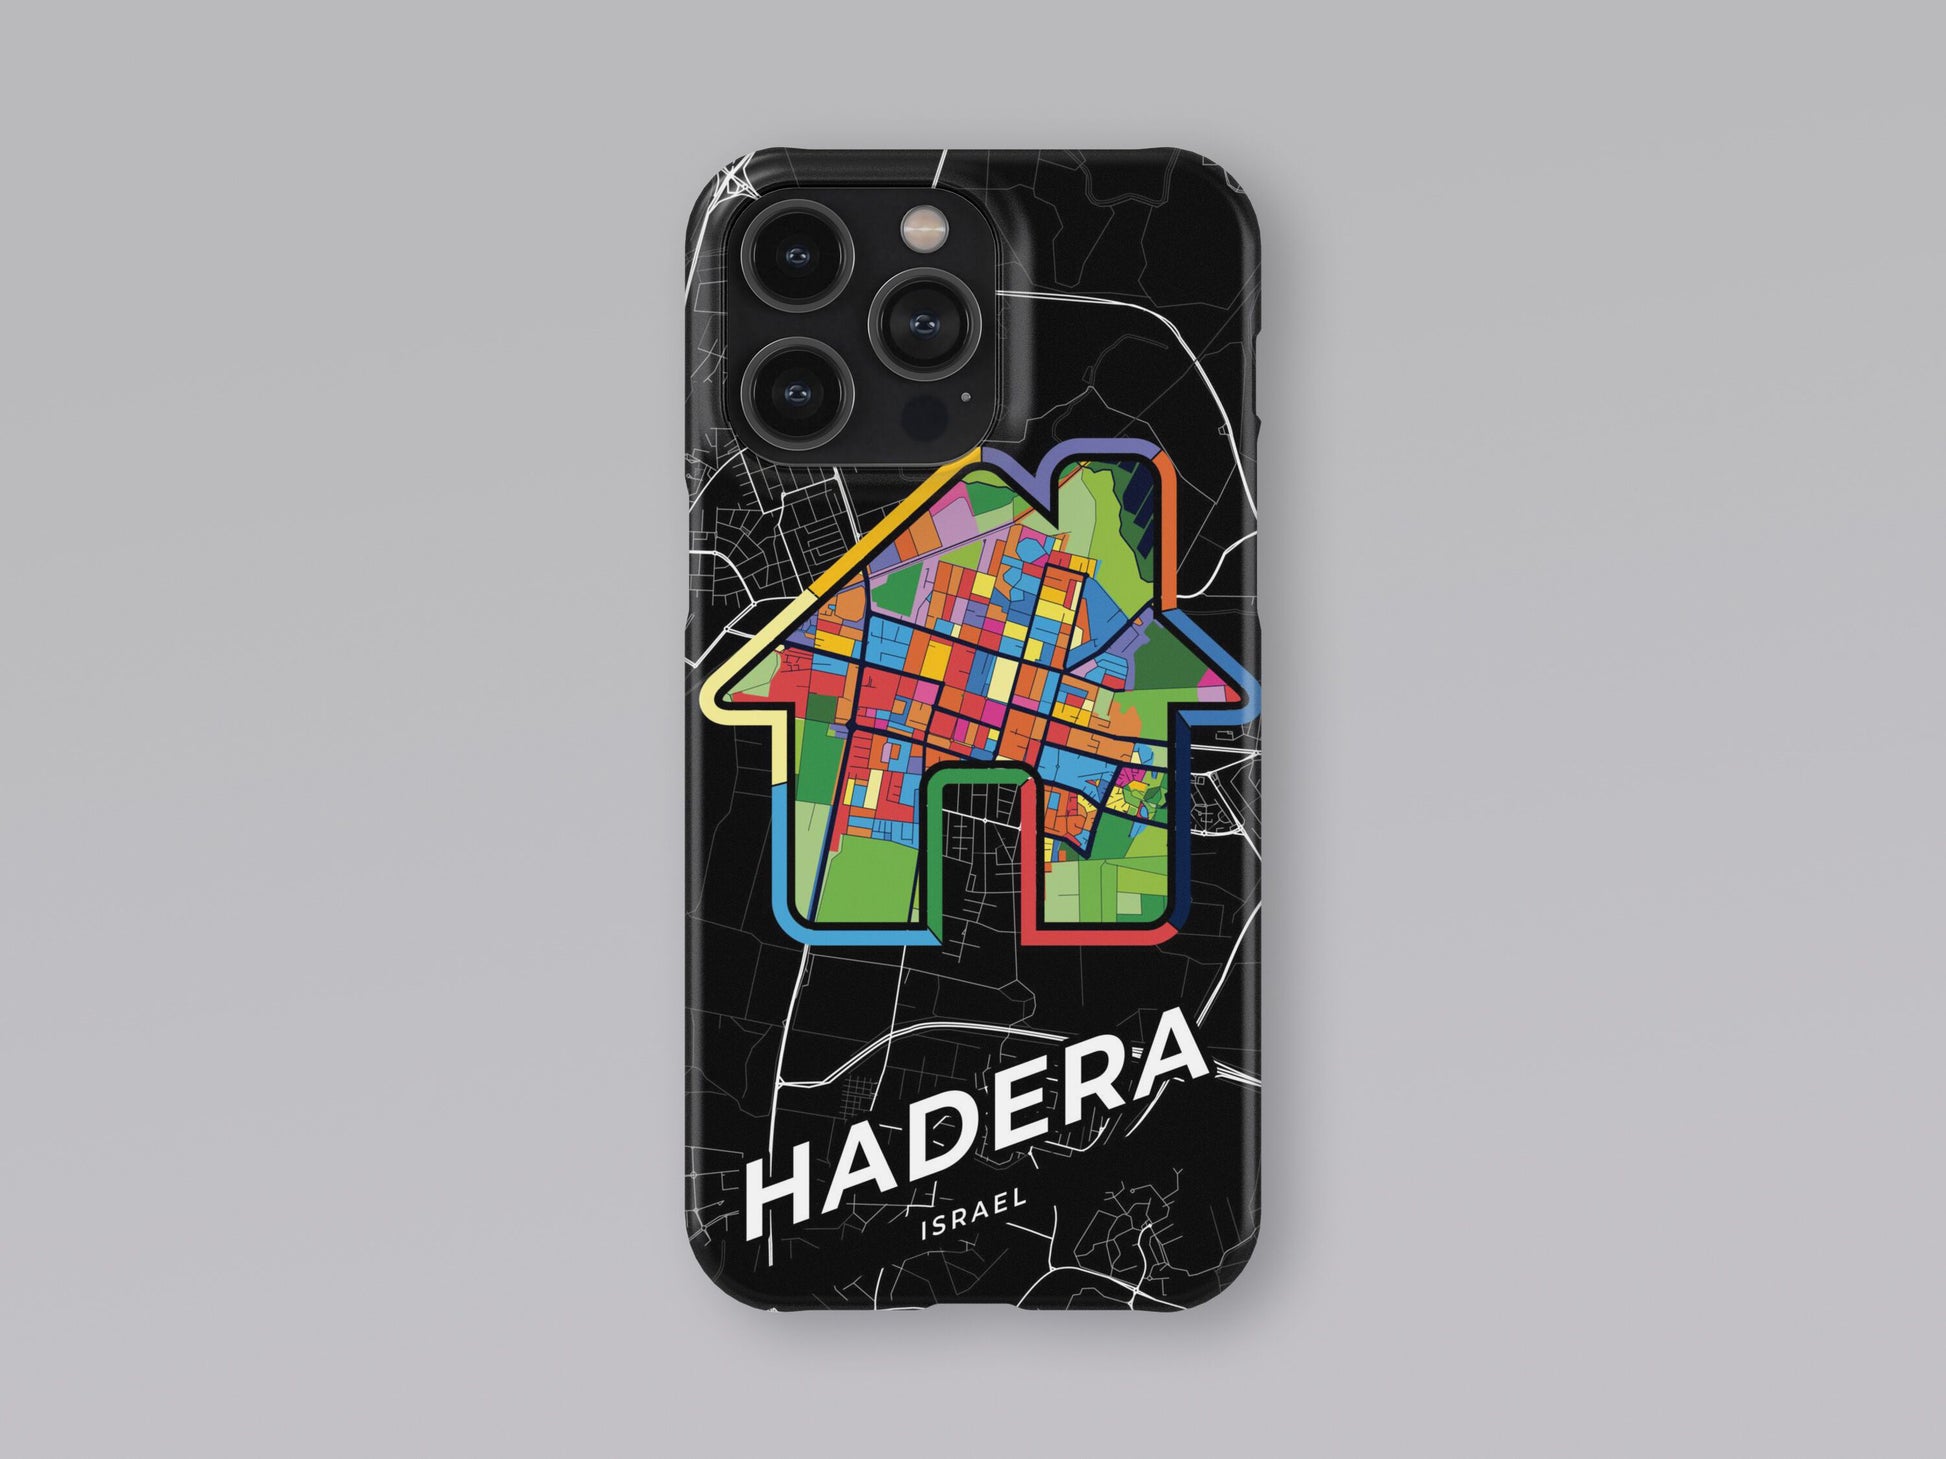 Hadera Israel slim phone case with colorful icon. Birthday, wedding or housewarming gift. Couple match cases. 3